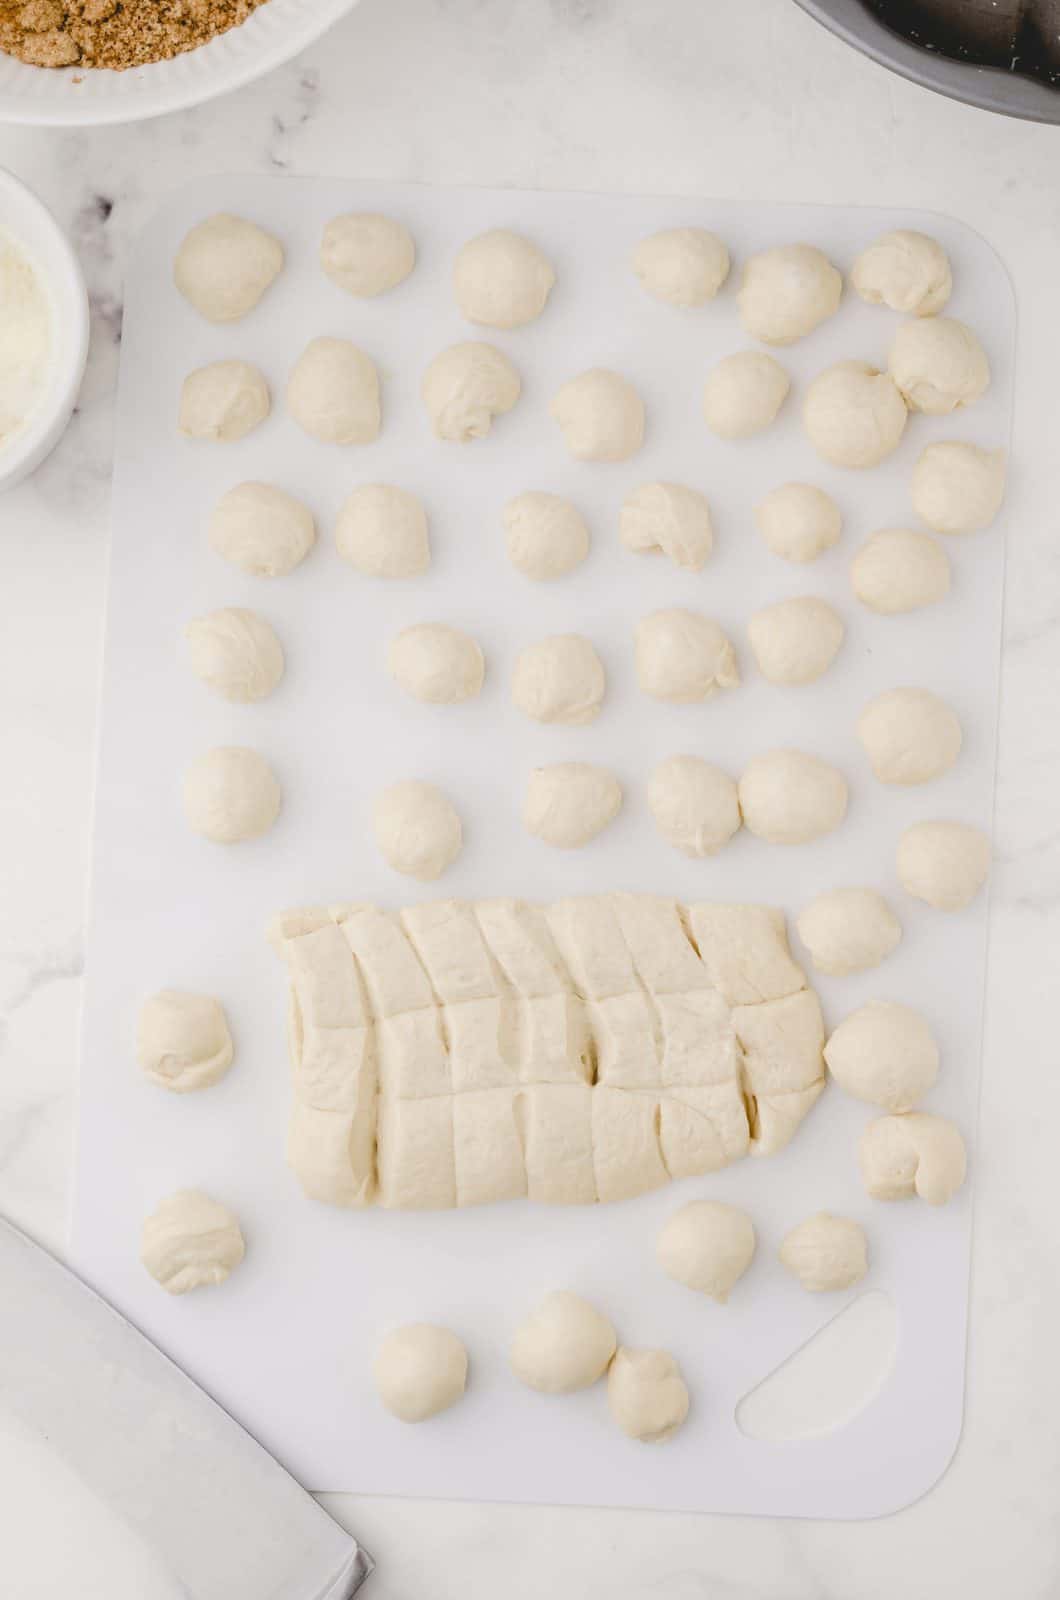 Bread dough being cut and rolled into balls.